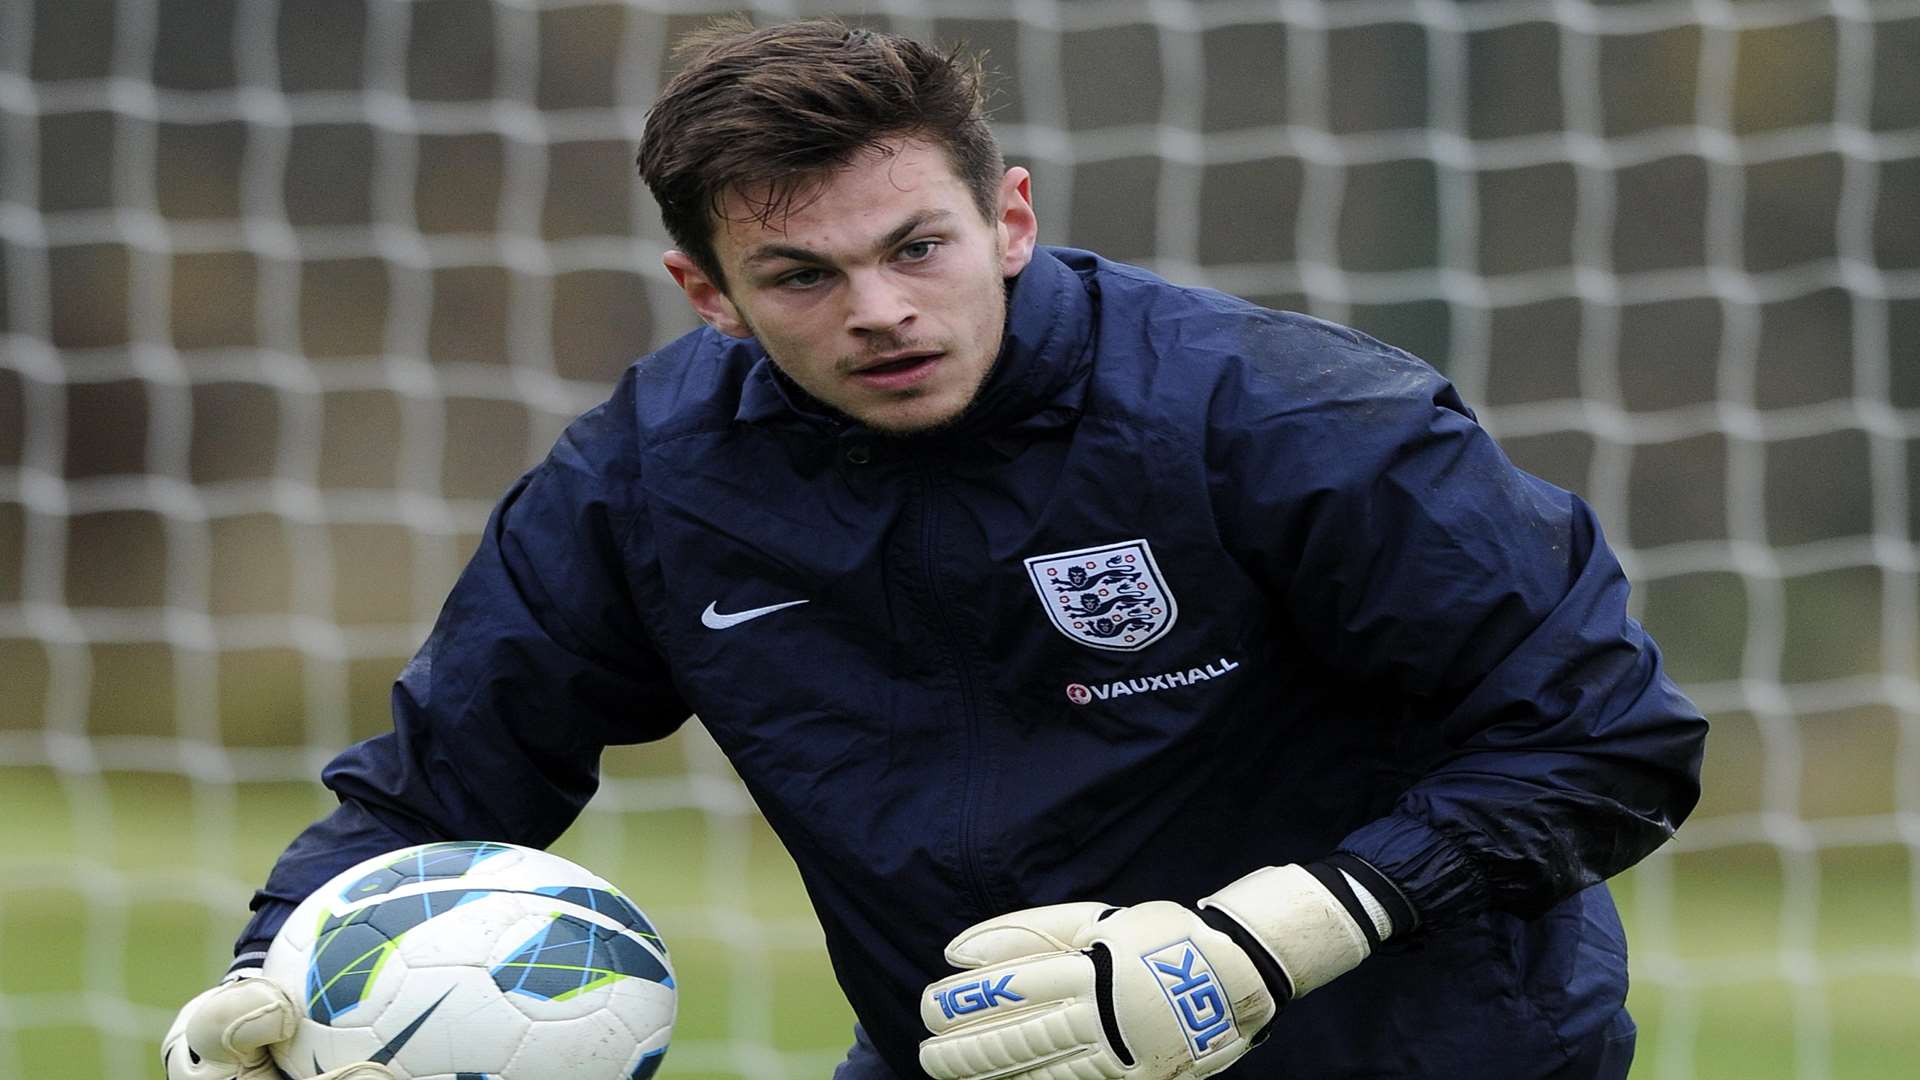 Brandon Hall training with England C Picture: Harry Trump/Pinnacle Photo Agency